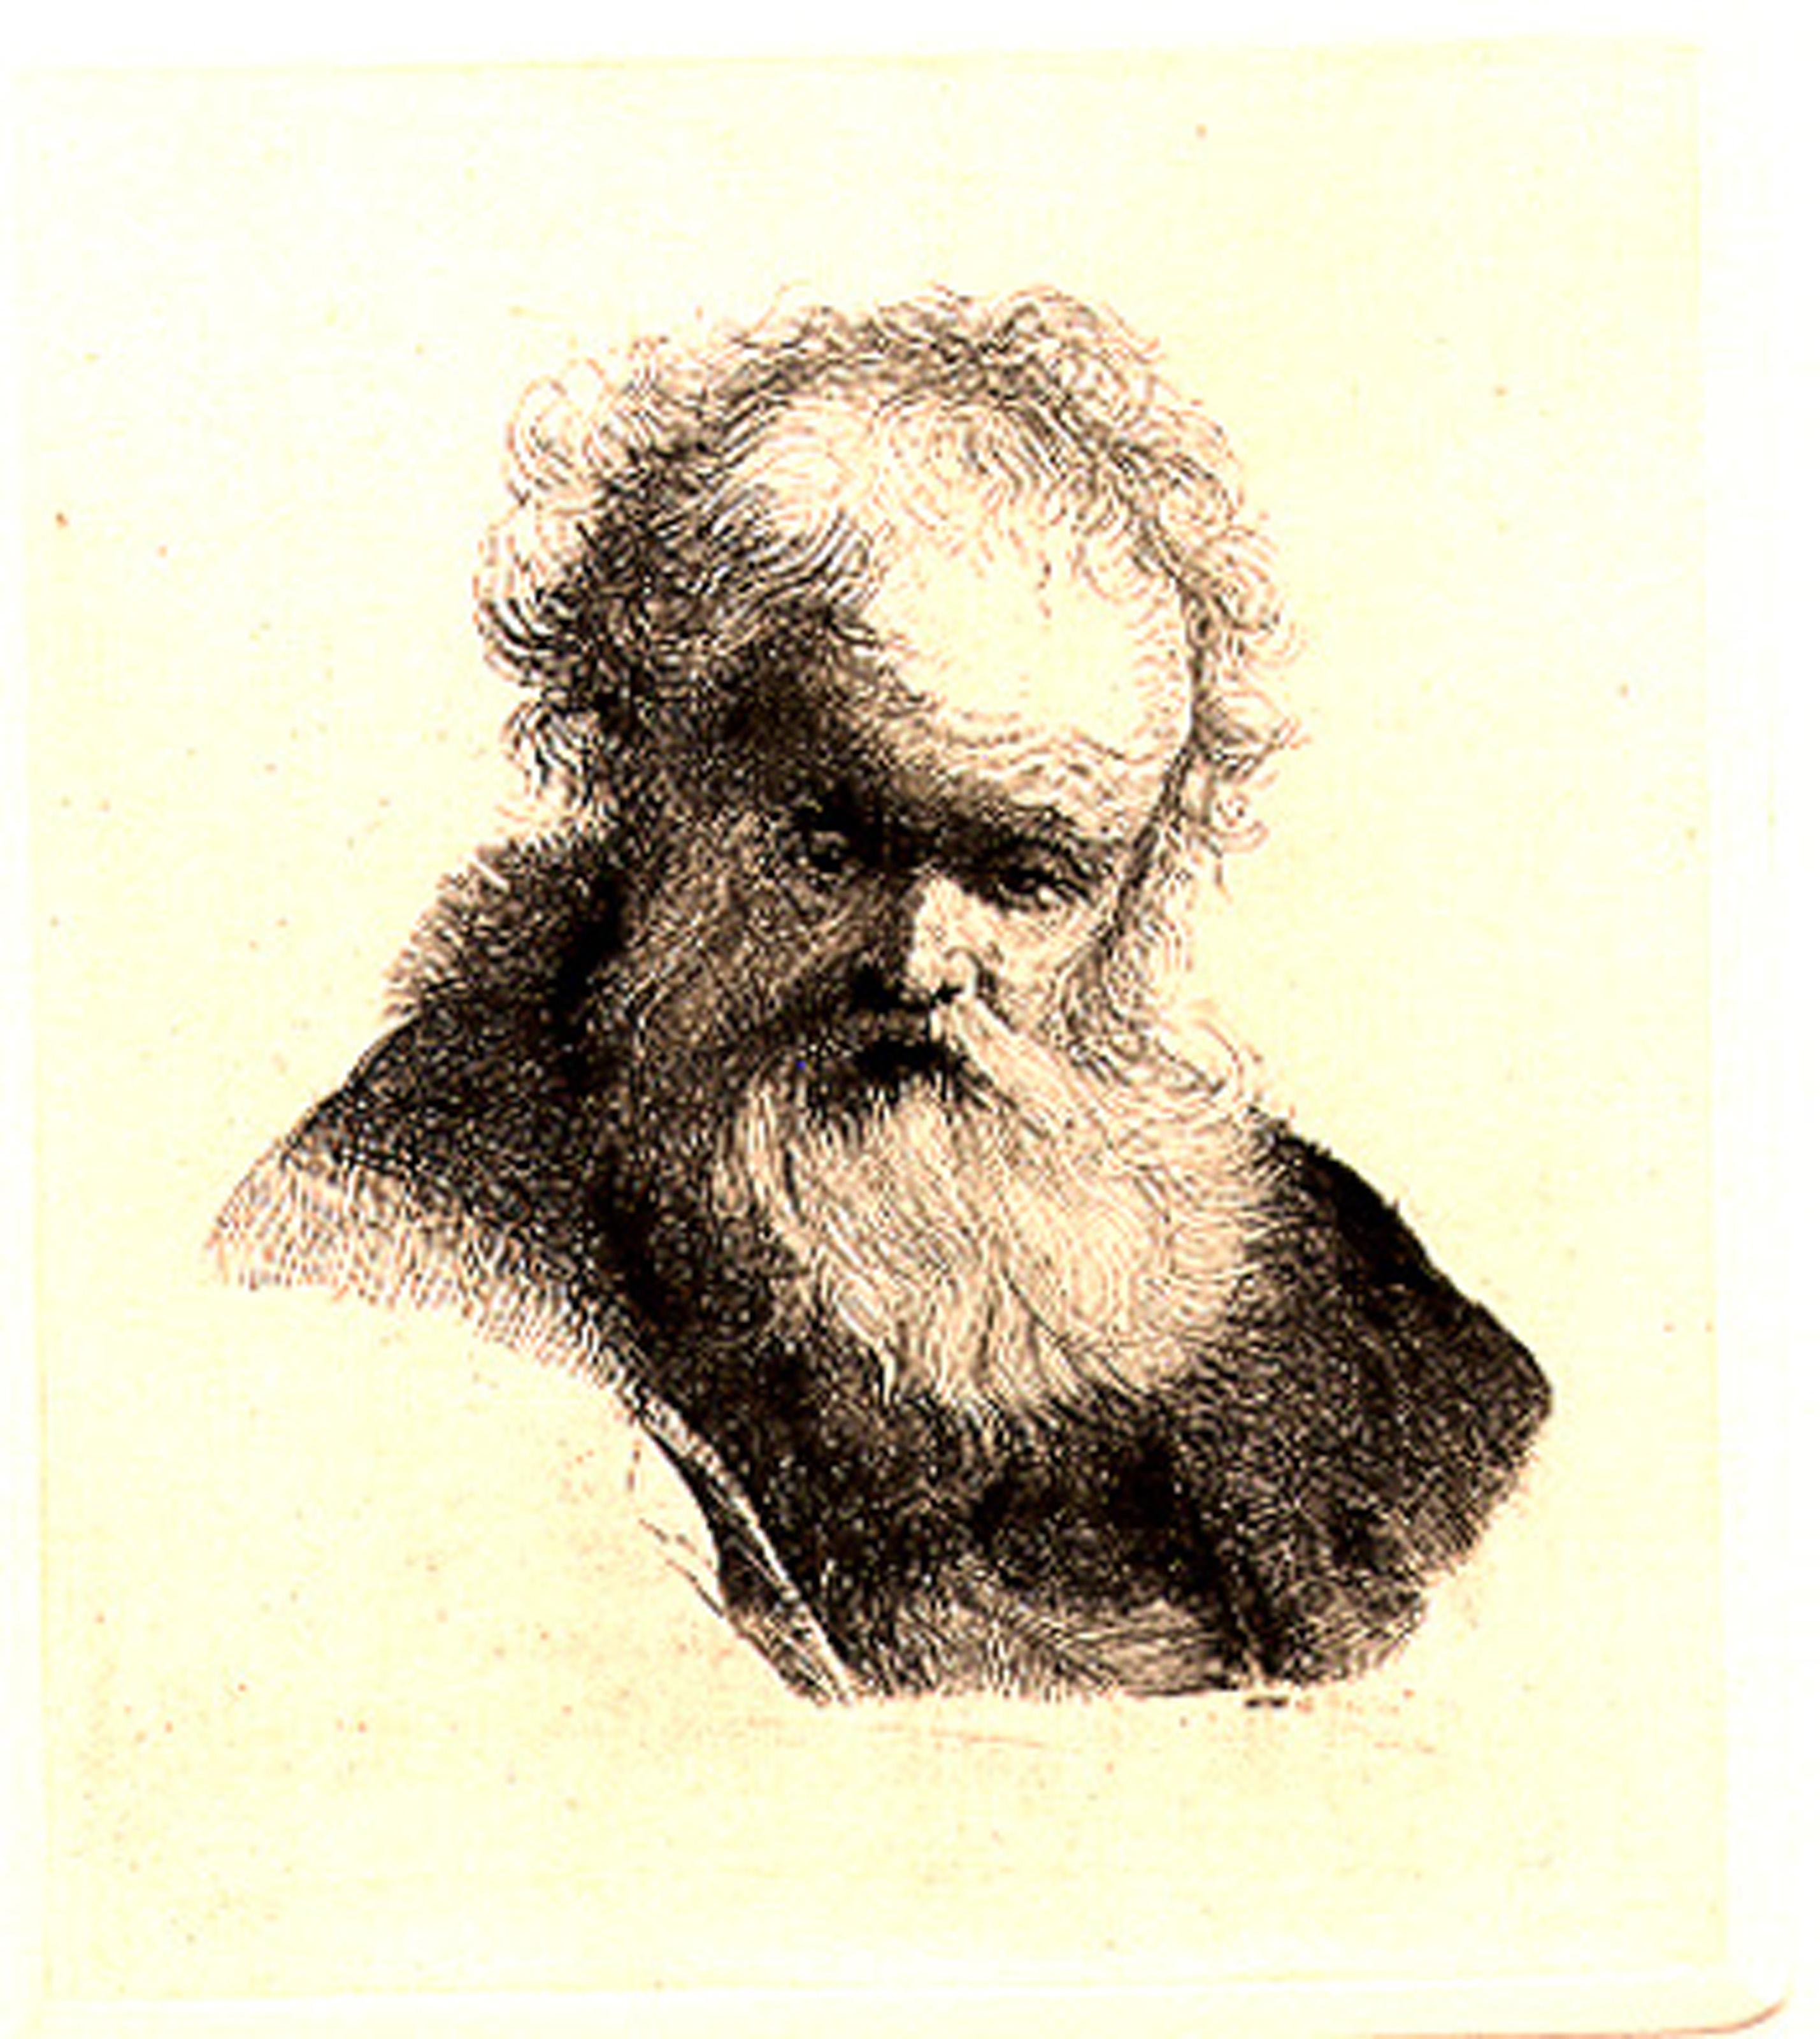  Rembrandt van Rijn, After by Amand Durand, Dutch (1606 - 1669) - Bust of an Old Man with Flowing Beard and White Sleeve, Year: Of Original 1631, Medium: Etching, Image Size: 3.5 x 3 inches, Size: 8  x 7 in. (20.32  x 17.78 cm), Printer: Amand